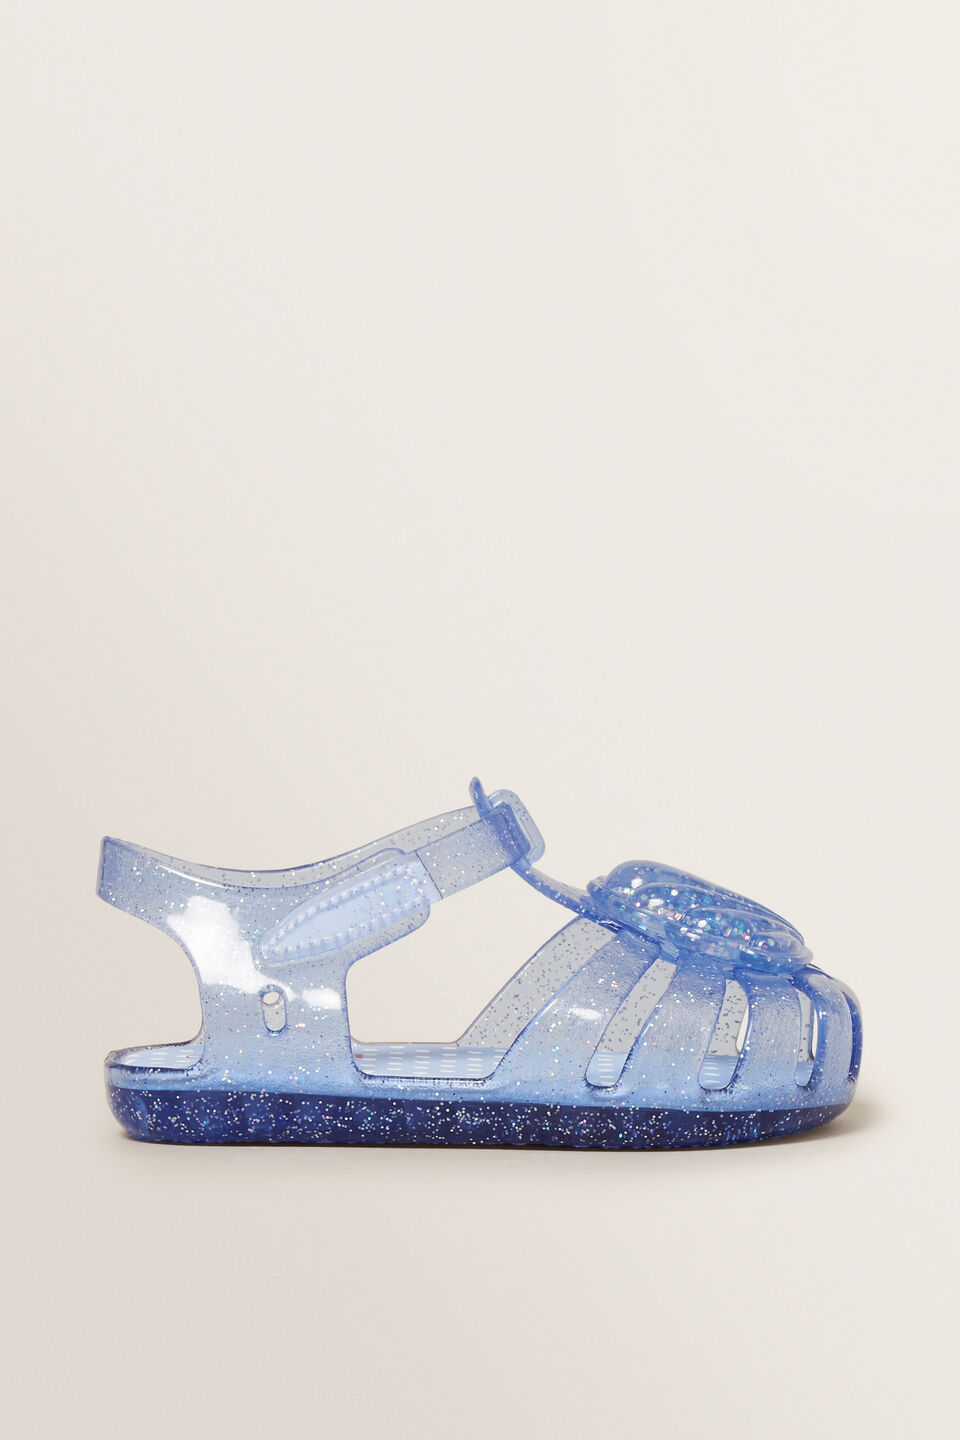 Shell Jelly Sandals  